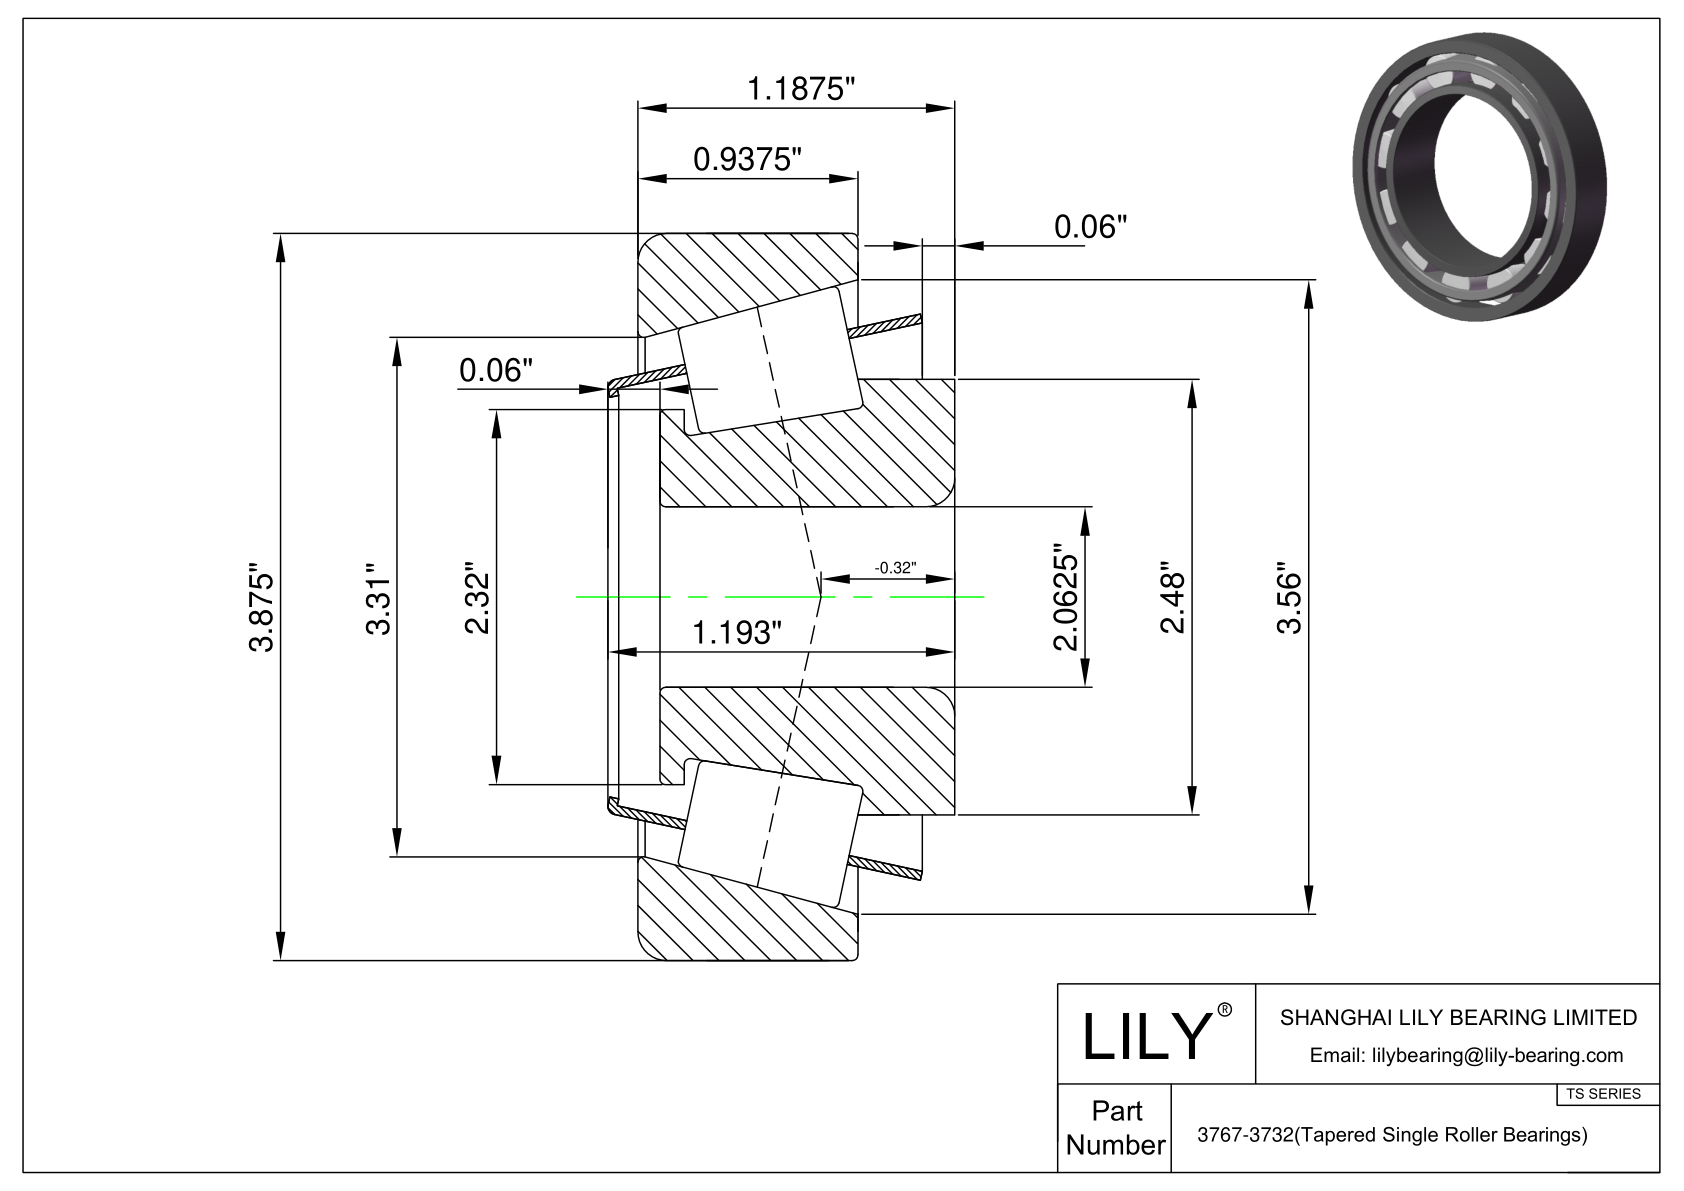 3767-3732 TS (Tapered Single Roller Bearings) (Imperial) cad drawing